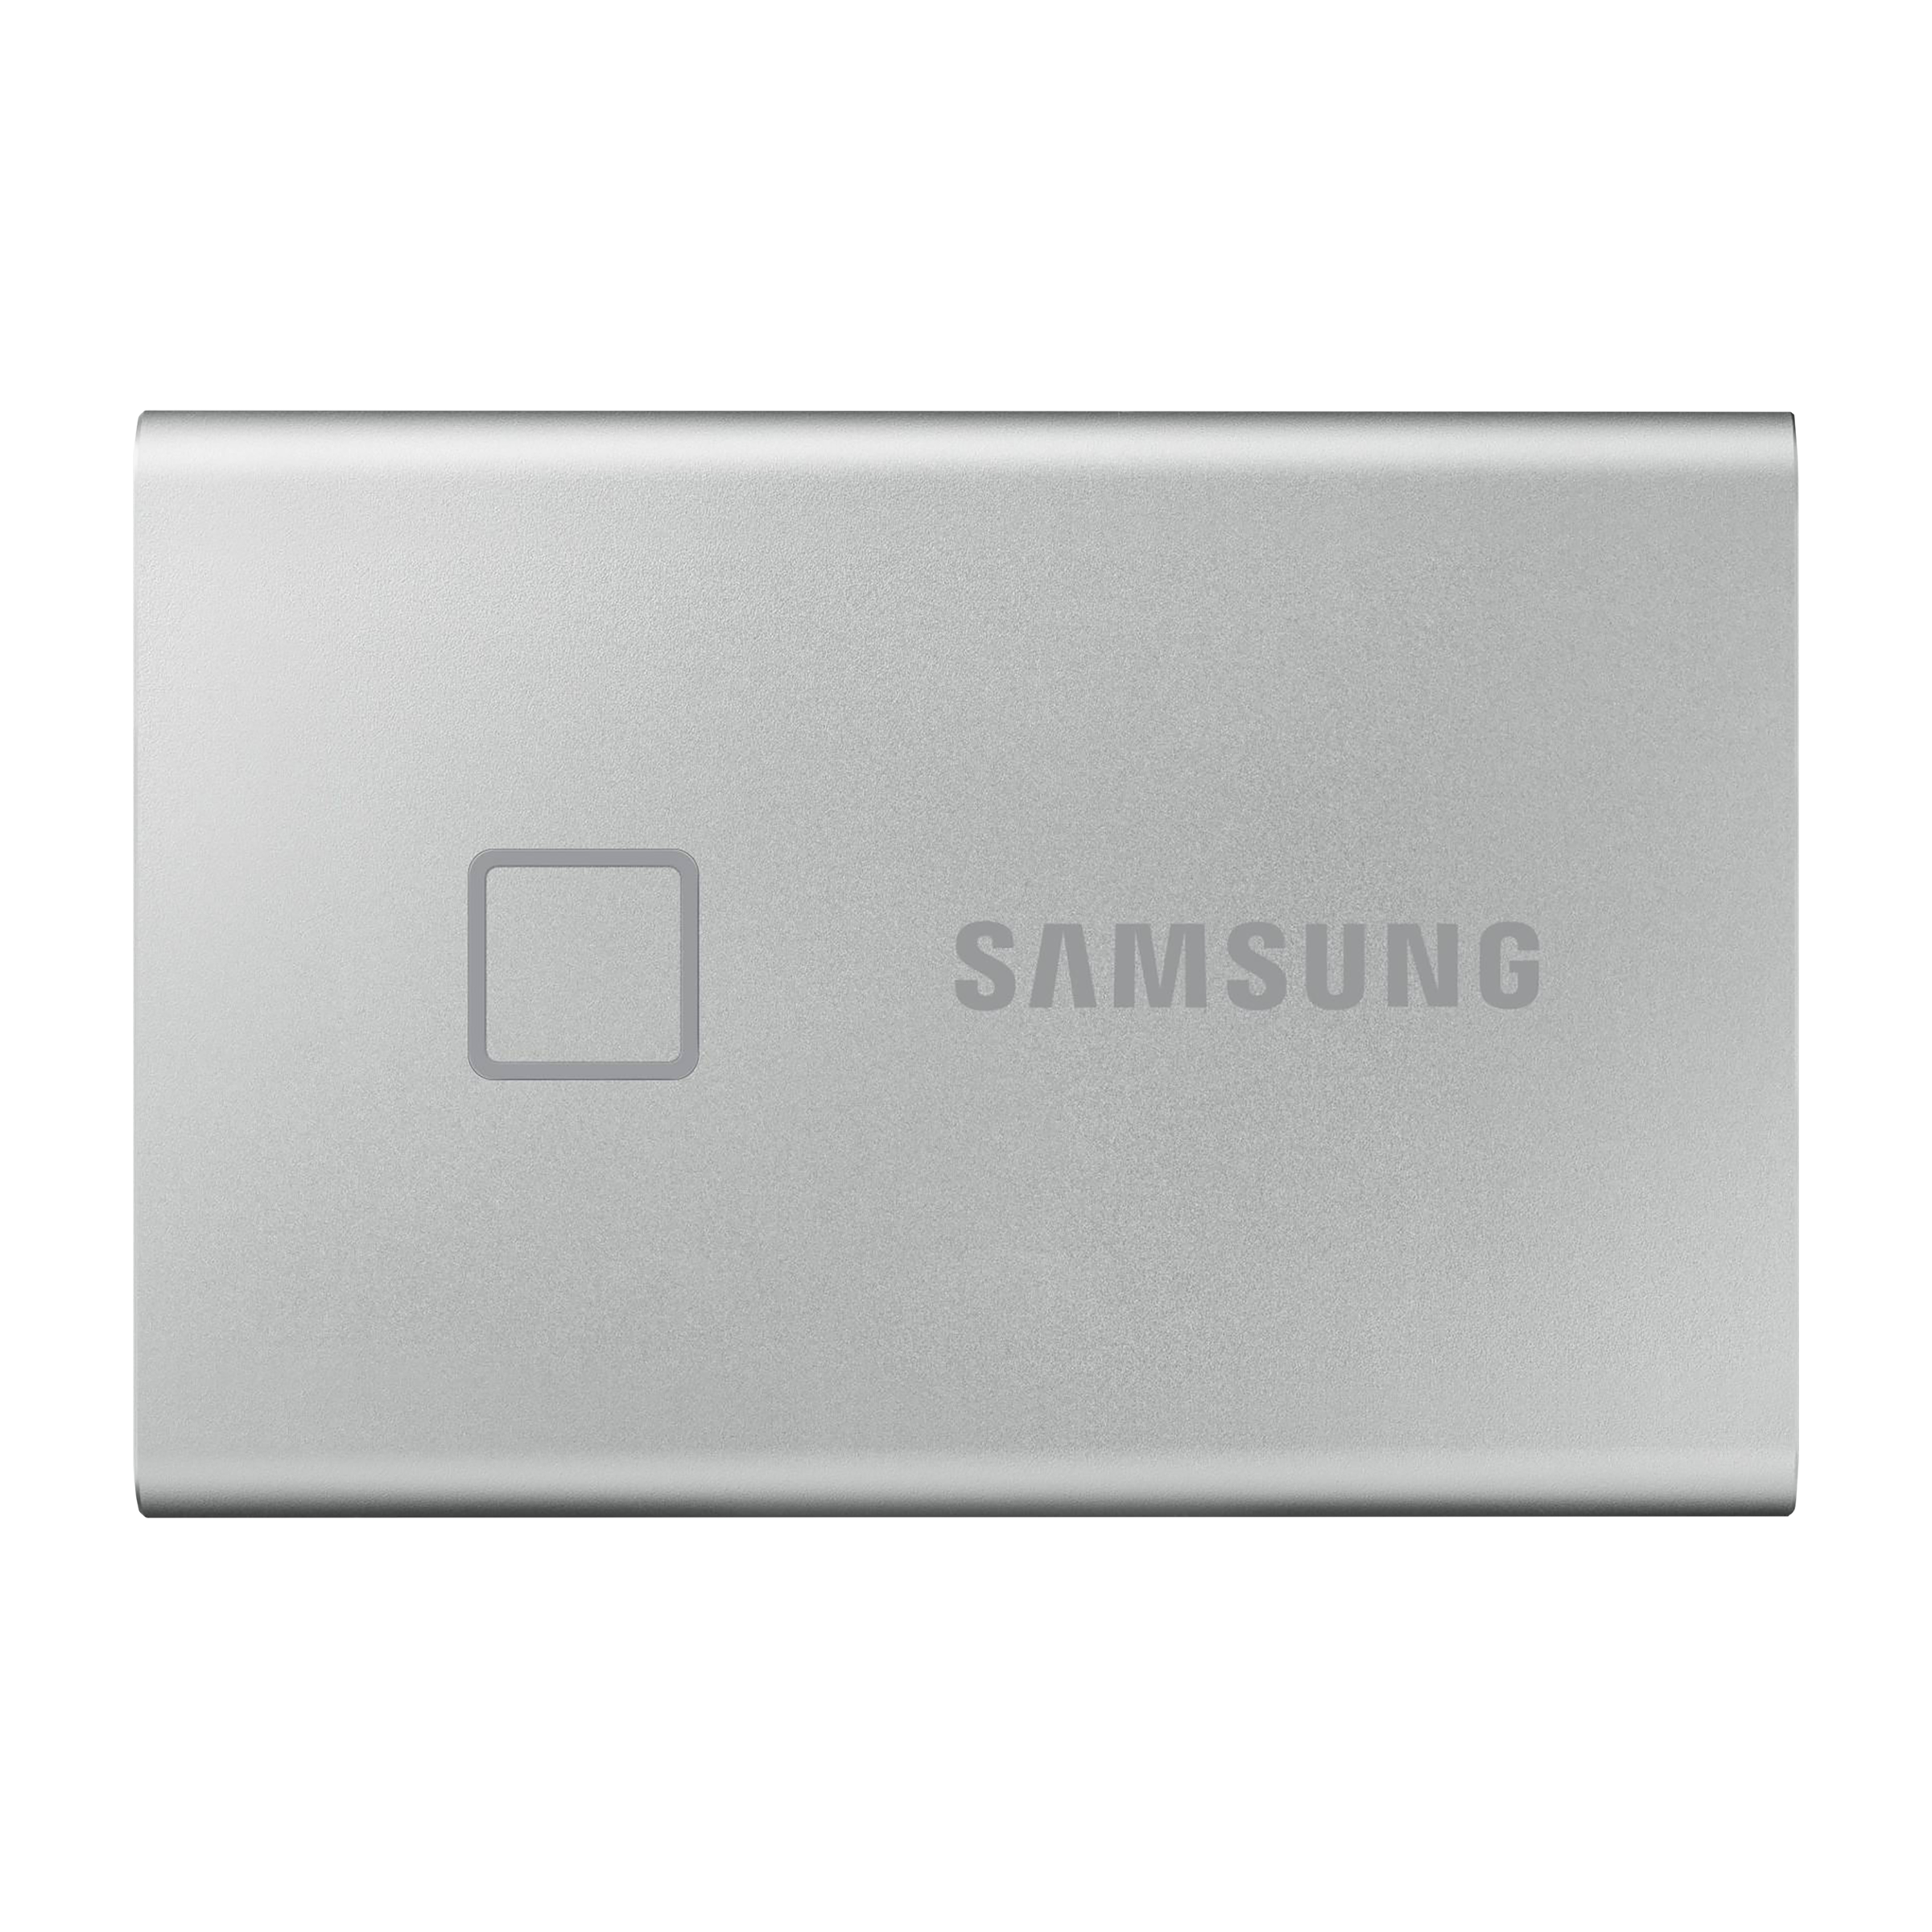 Samsung T7 Touch 1 TB USB 3.2 Solid State Drive (Fingerprint Security, MU-PC1T0S/WW, Silver)_1